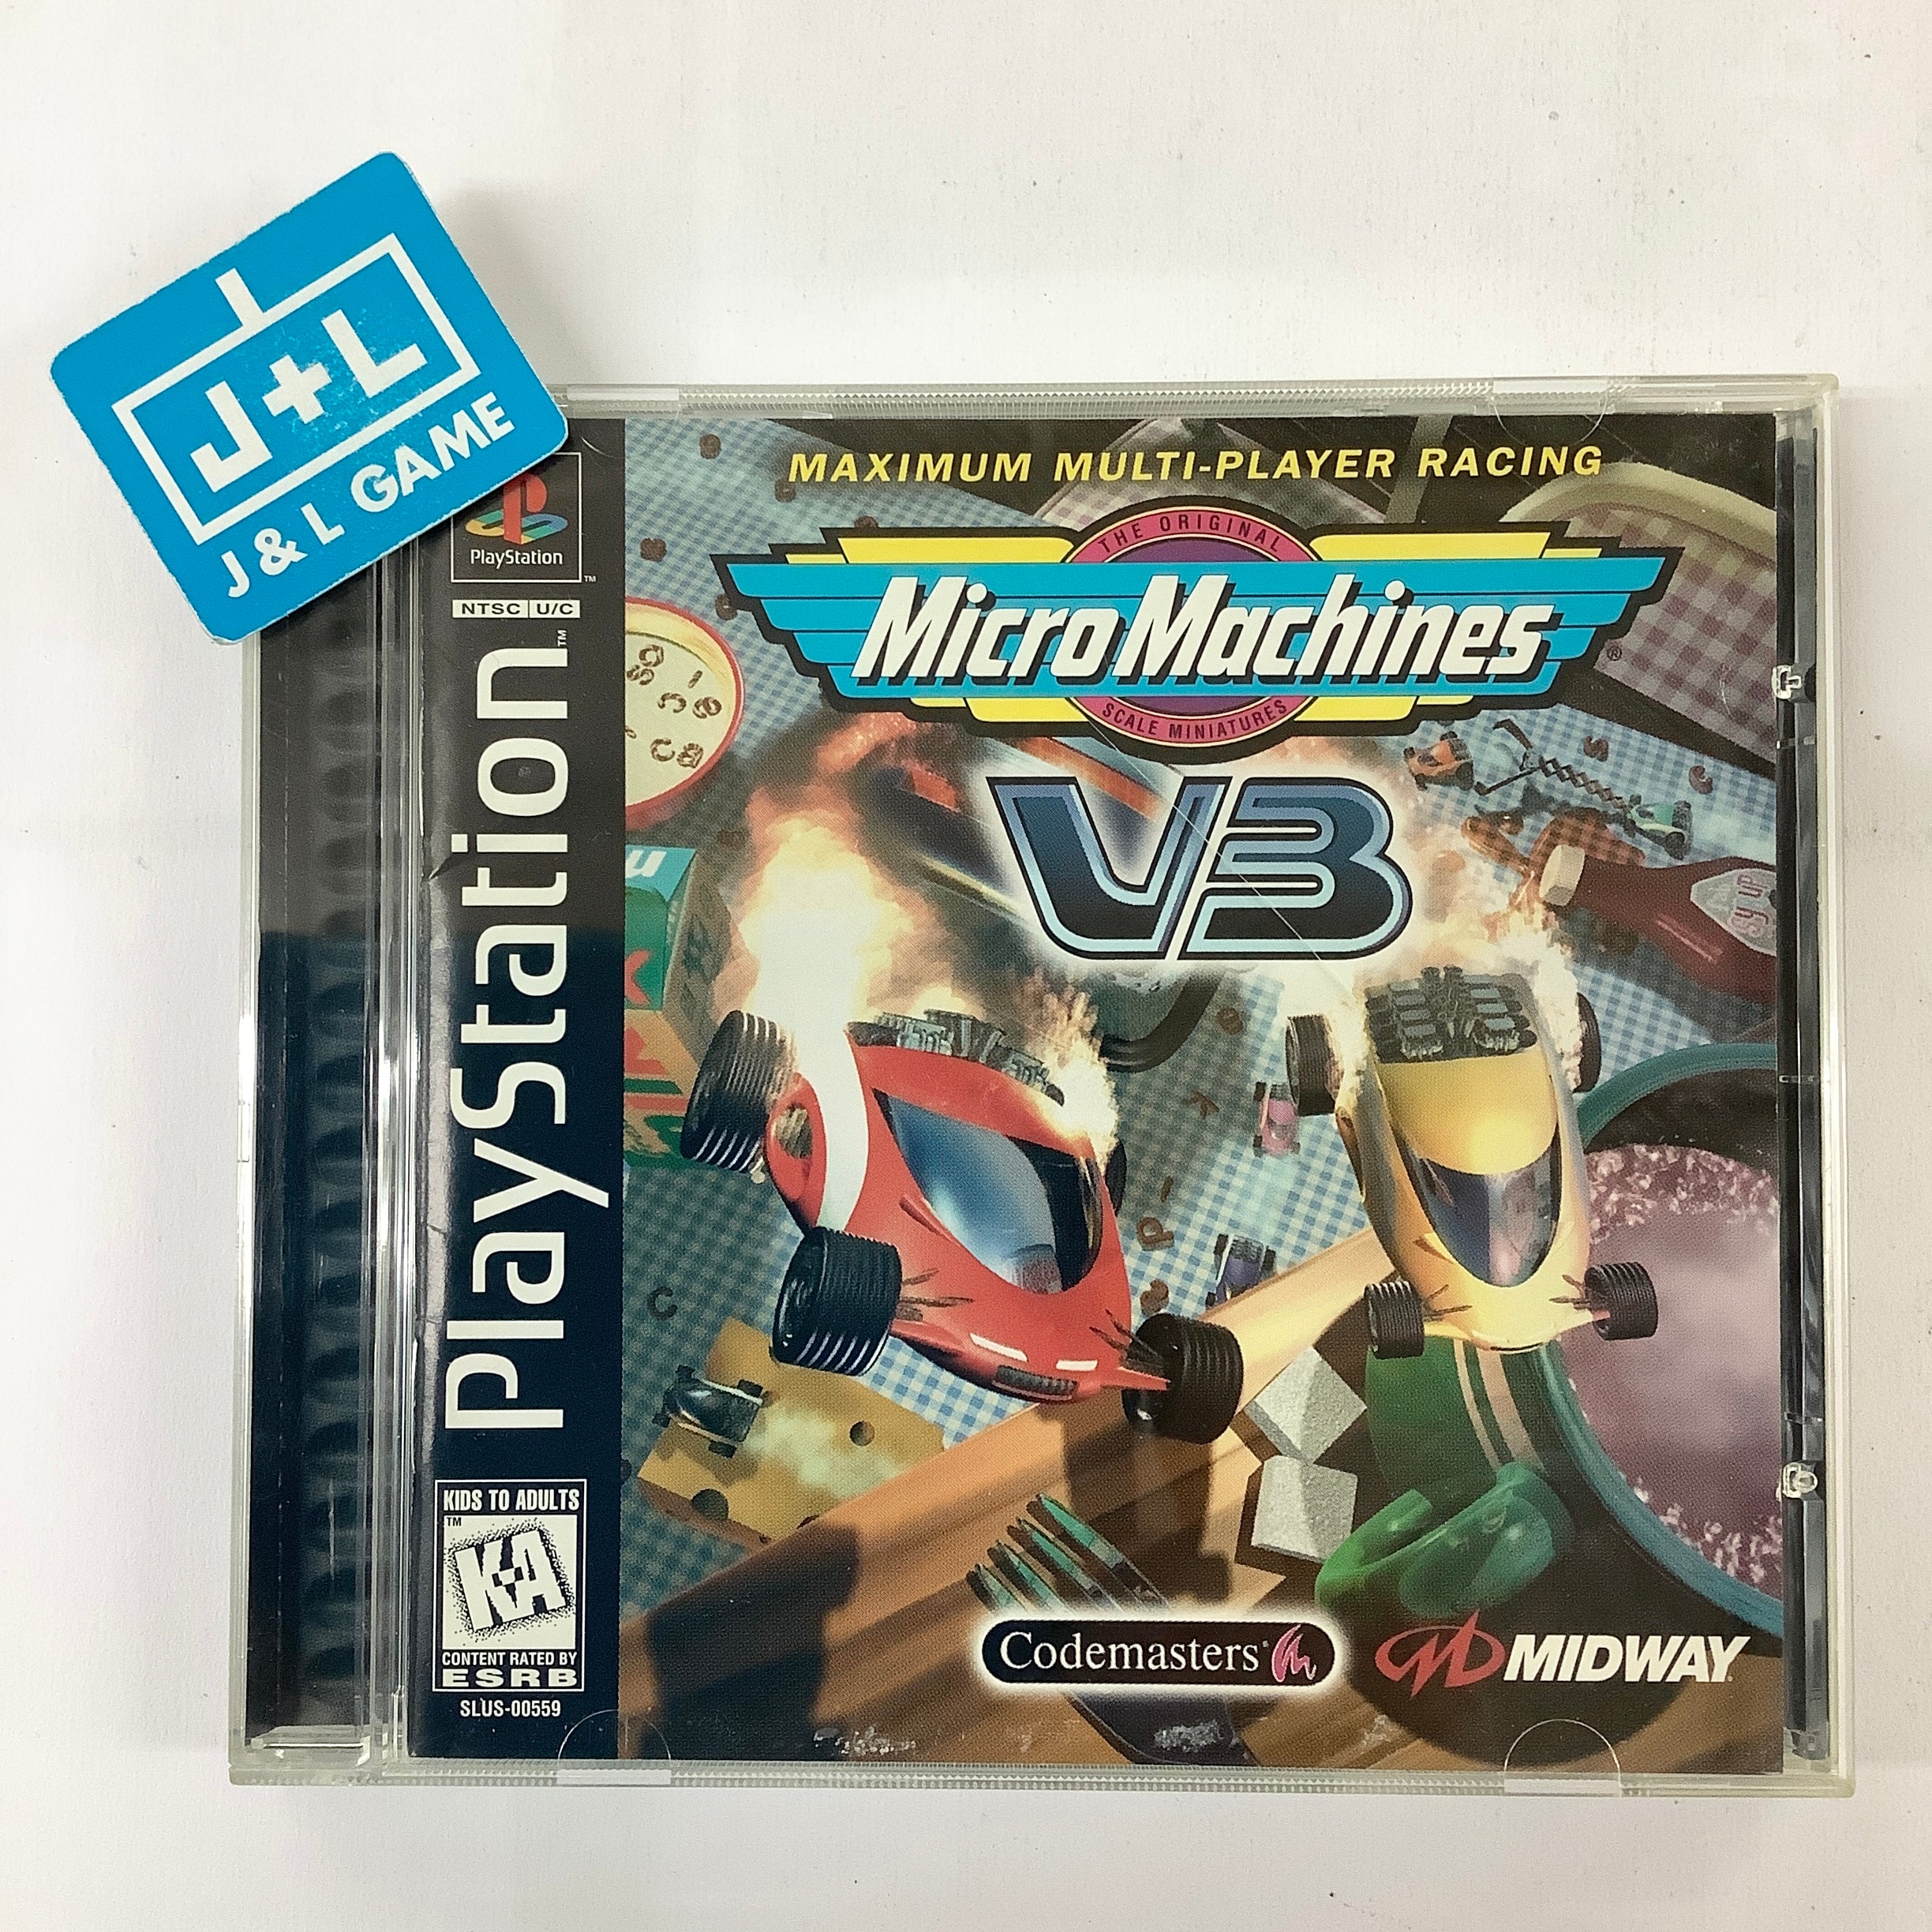 Micro Machines V3 - (PS1) PlayStation 1 [Pre-Owned] Video Games Midway   